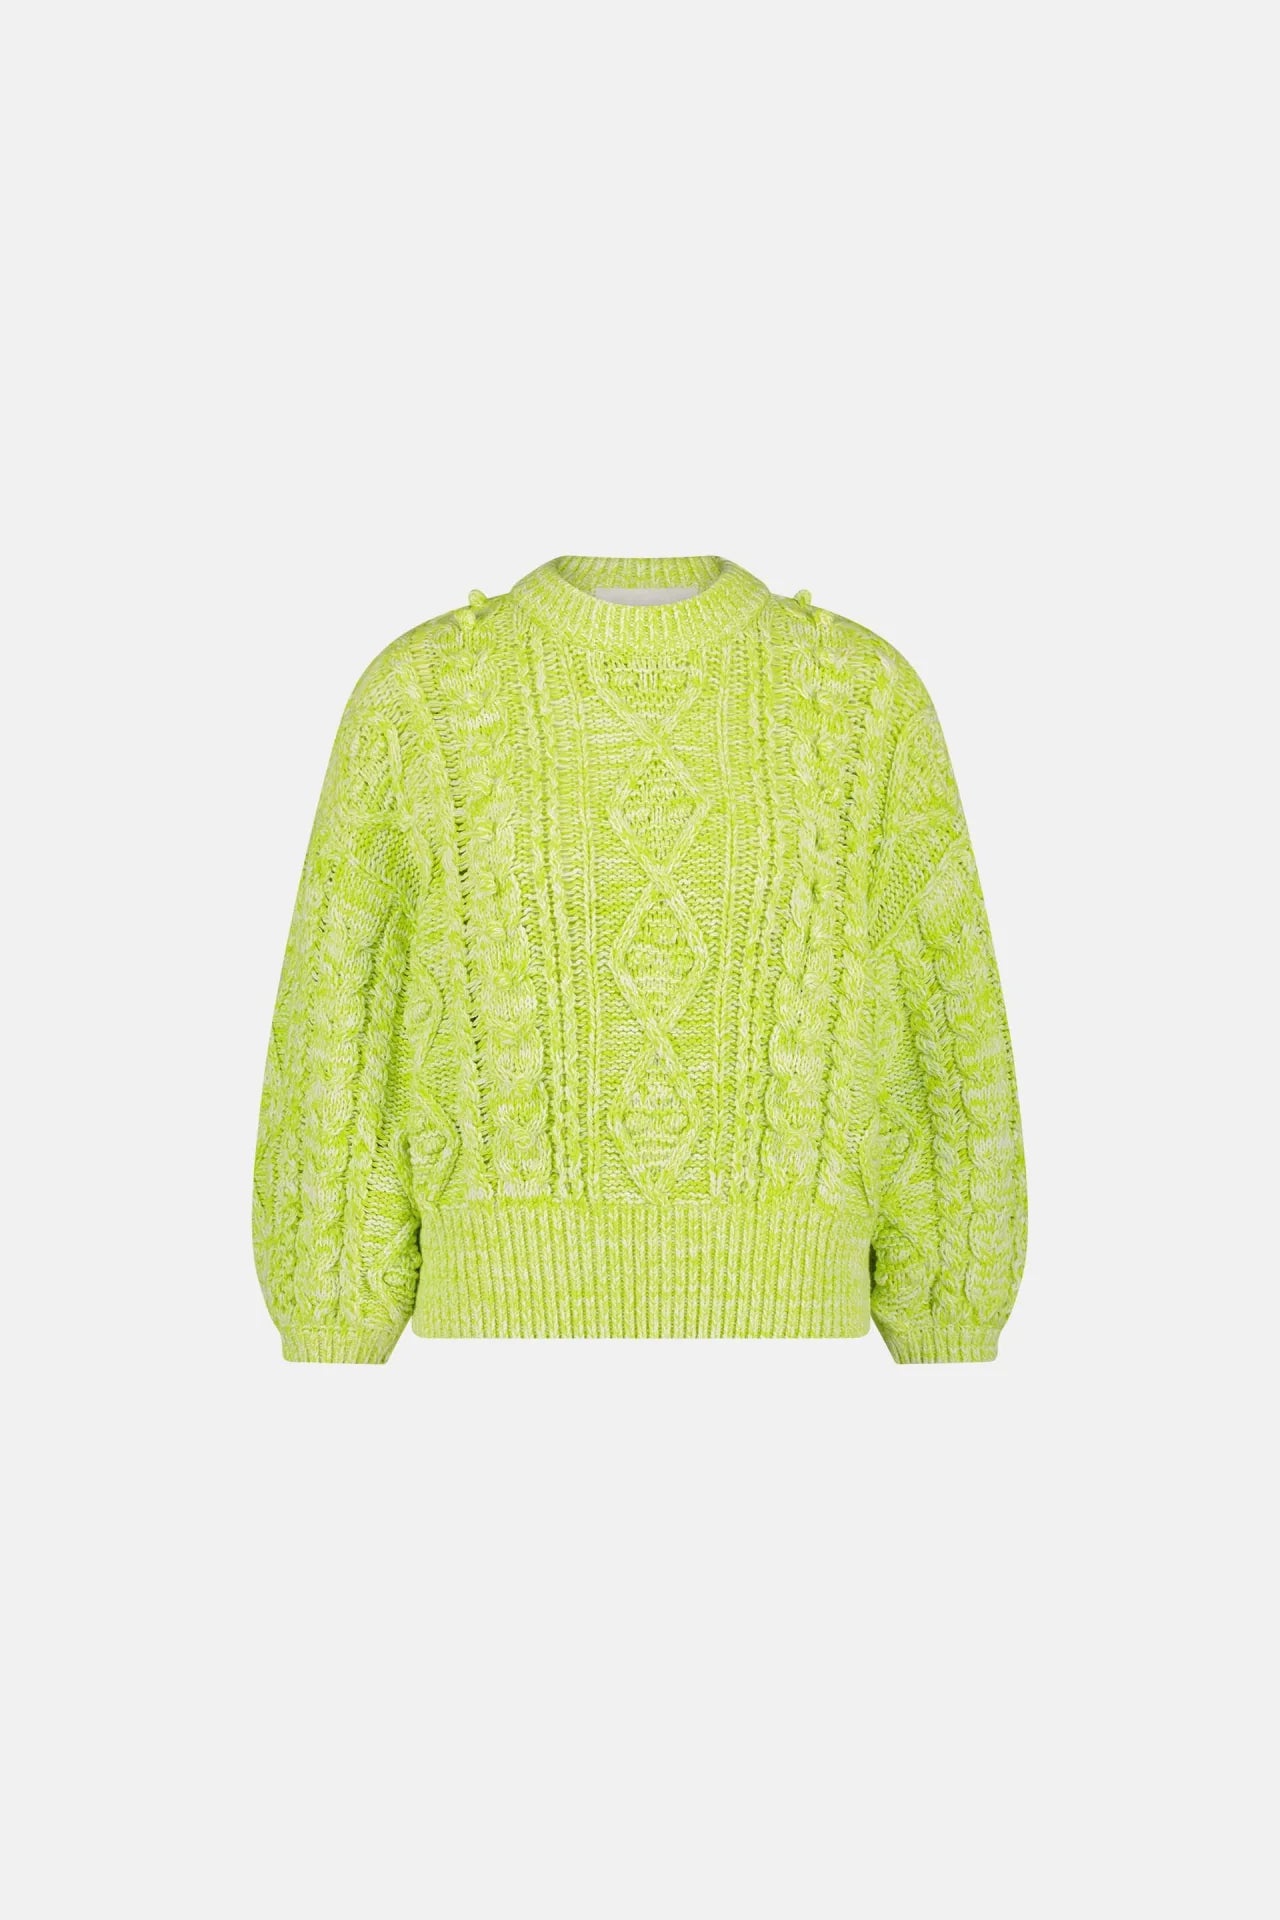 Fabienne Chapot Suzy 3/4 sleeve Pullover Lovely Lime